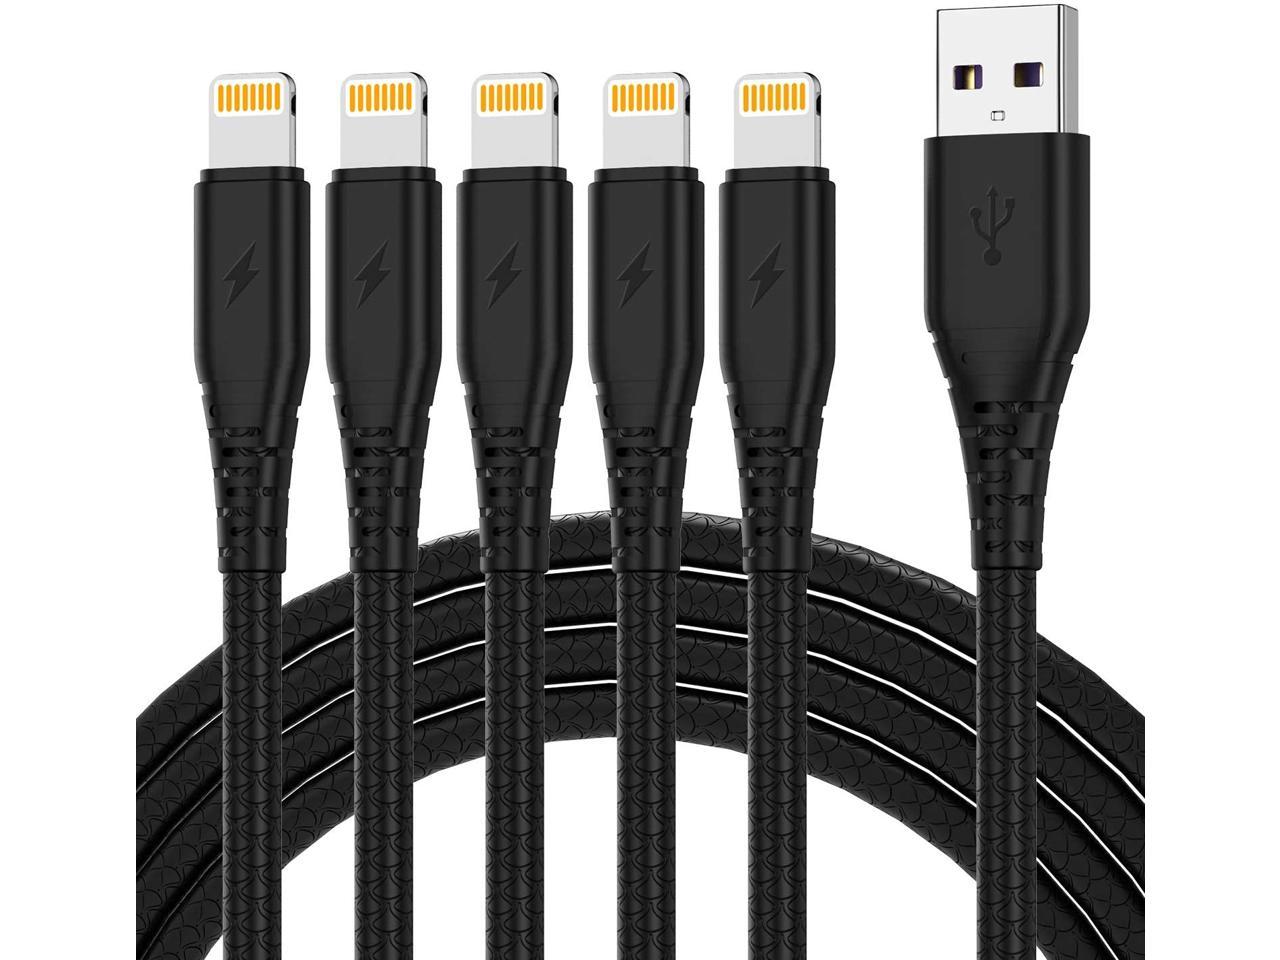 … Cabepow iPhone Charger Cable 3ft 5Pack Lightning Cable to UBS A Charging Cable Compatible with iPhone 11 Xs Max XR X 8 Plus 7 Plus 6 Plus SE iPad Pro iPod 10ft Black 